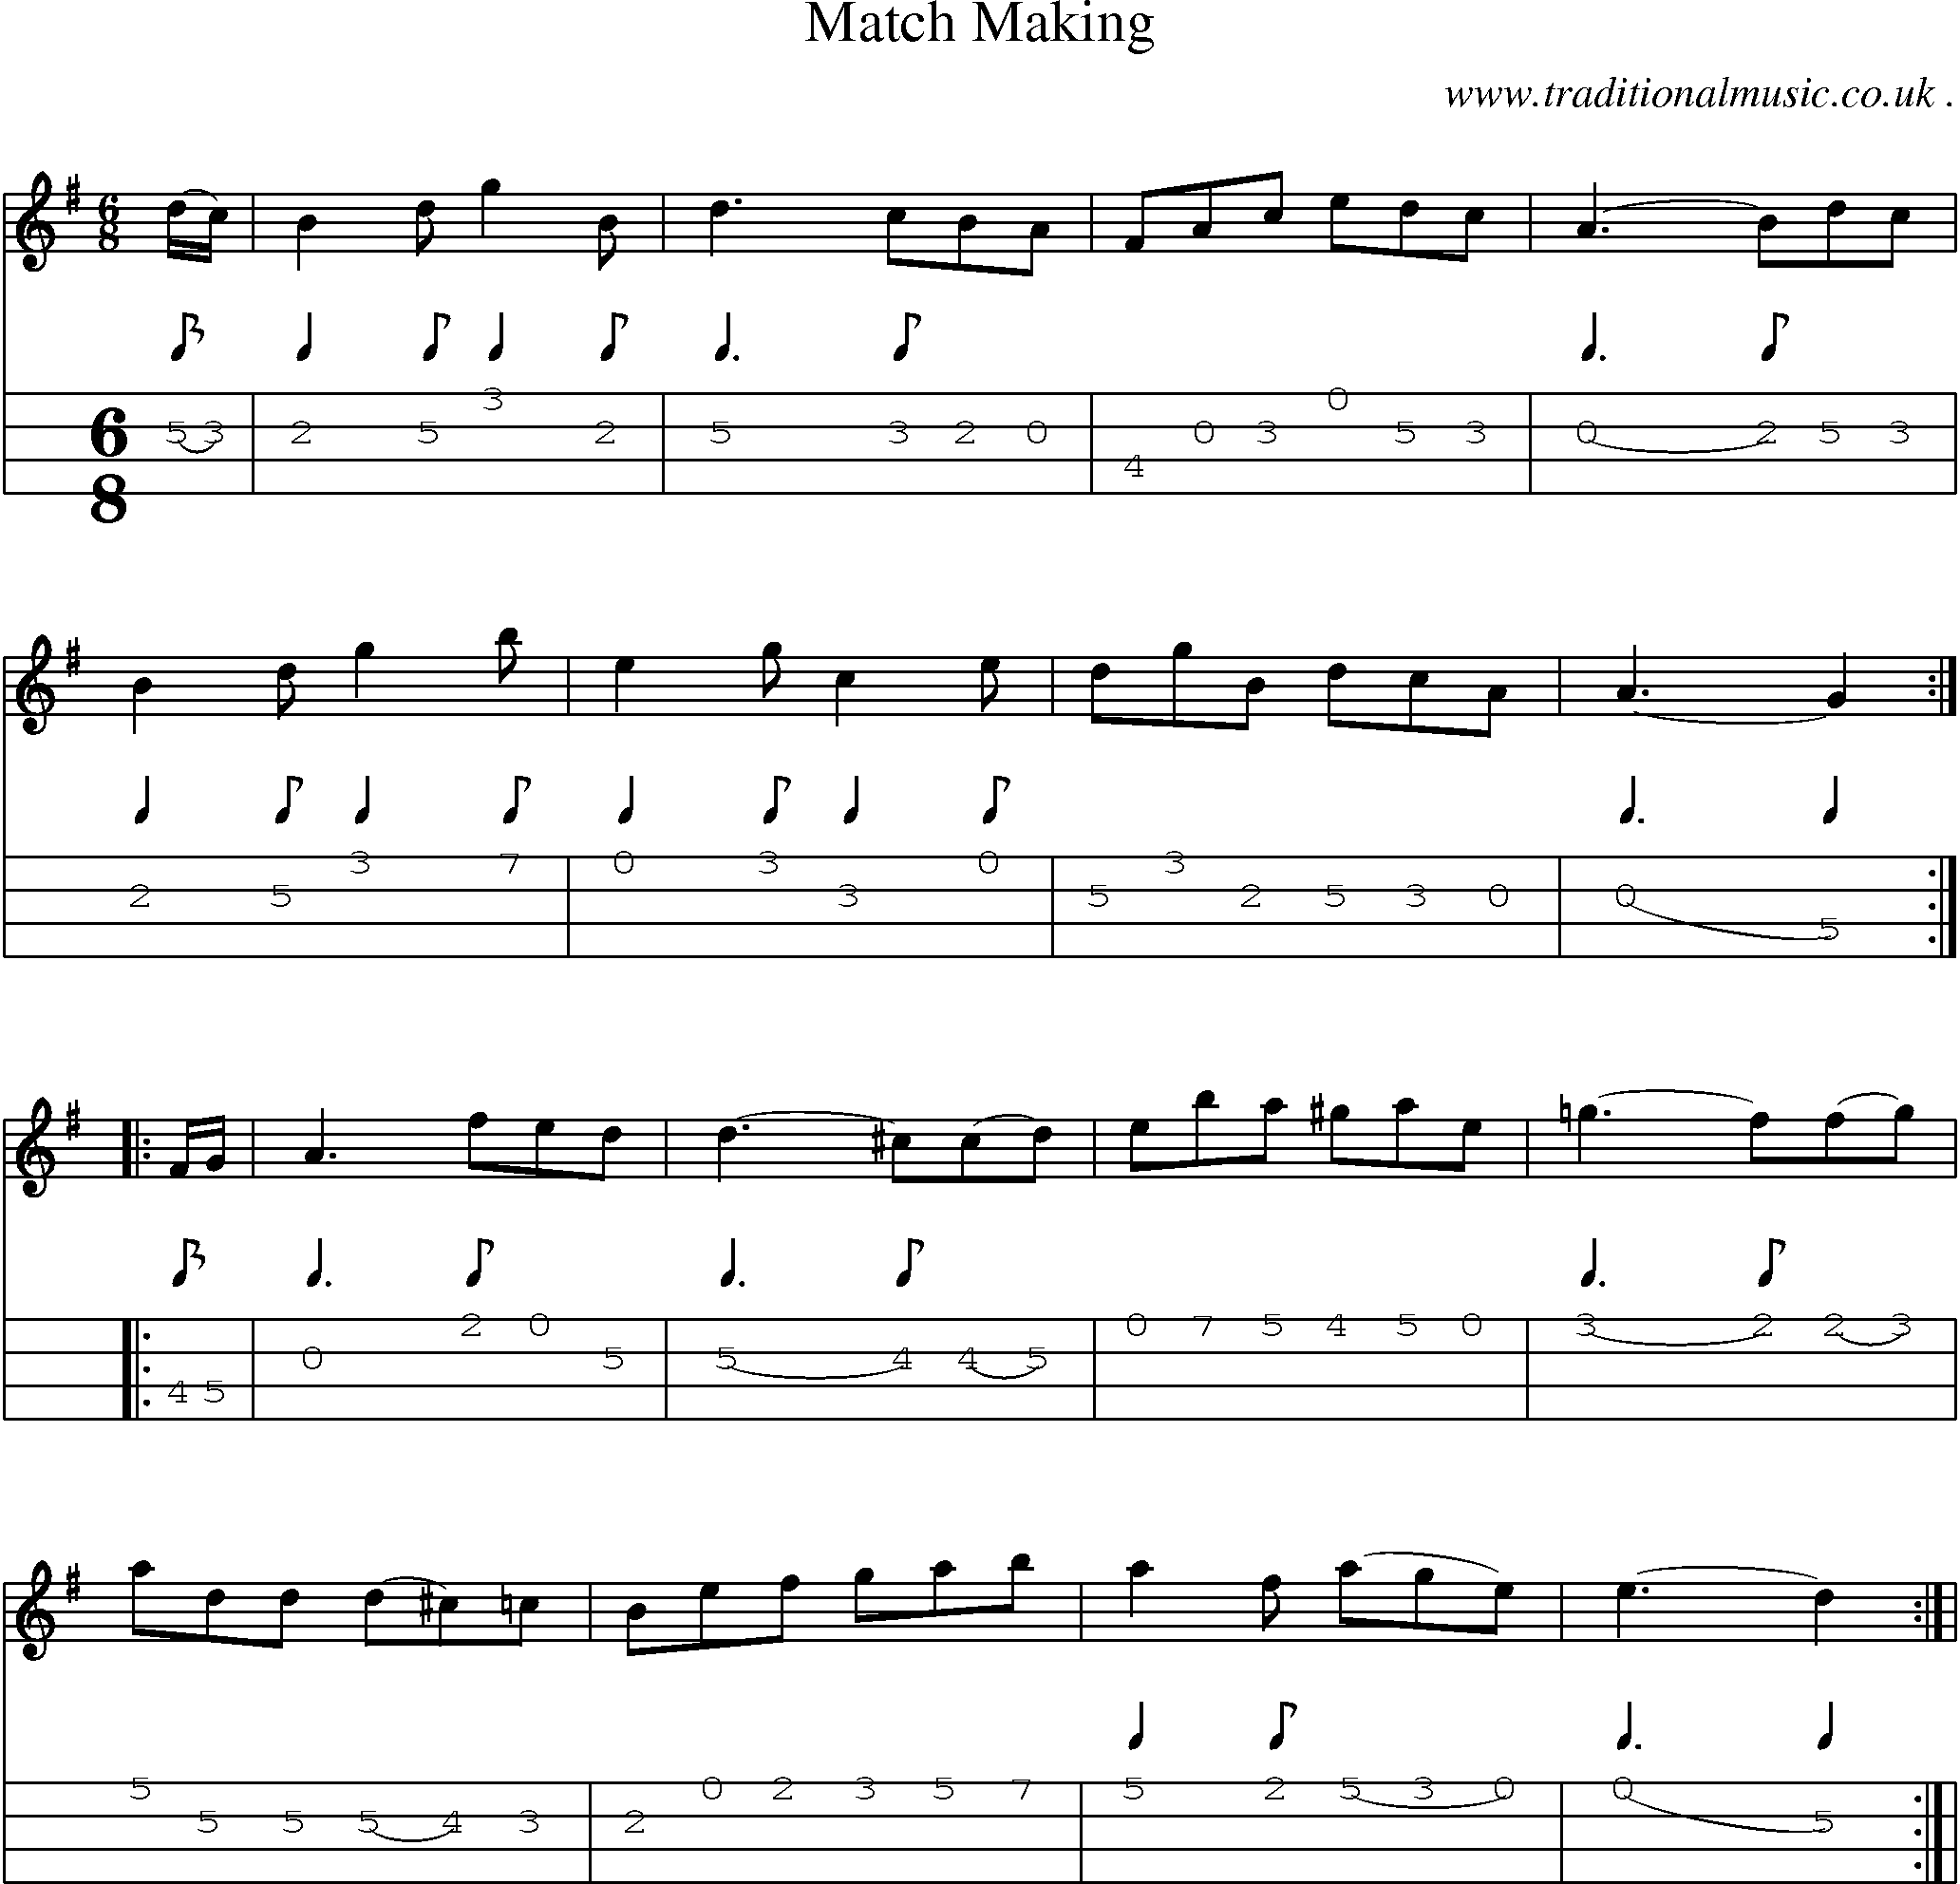 Sheet-Music and Mandolin Tabs for Match Making